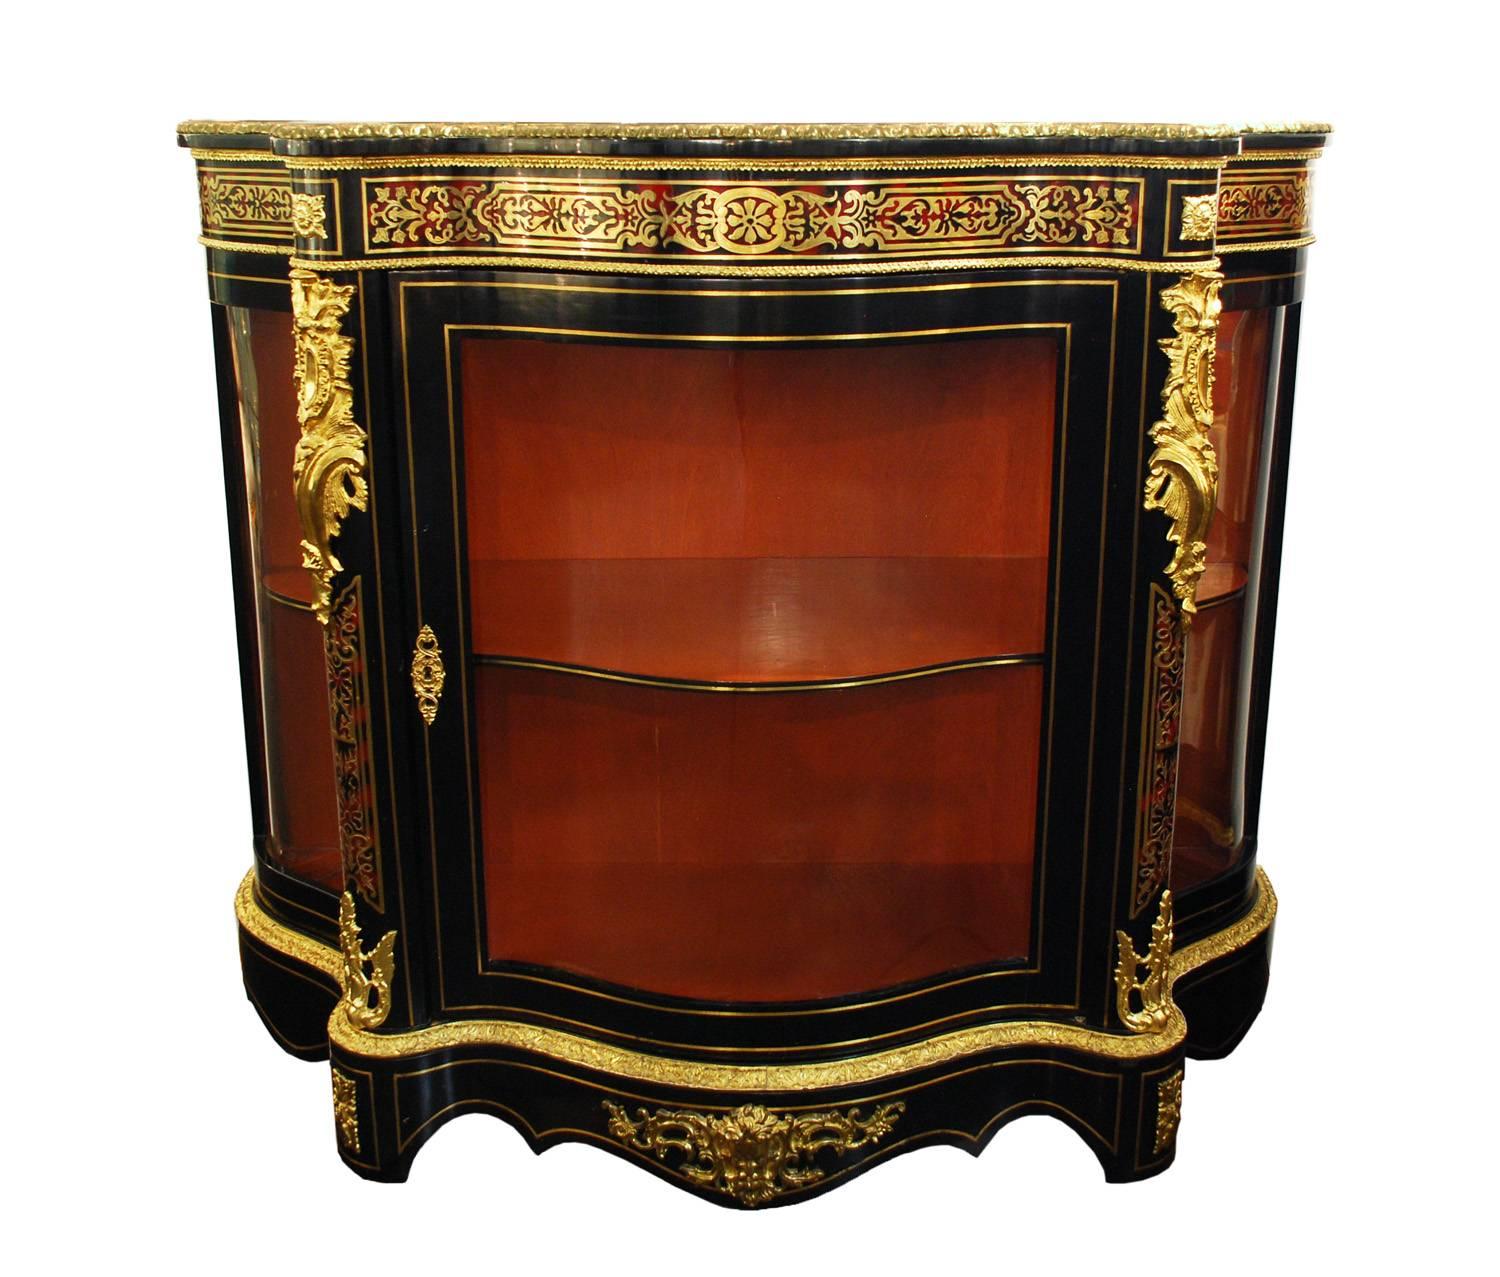 Impressive pair of Boulle style ebonized cabinets with glass doors and copious adornment. The tortoiseshell type inlay and intricately cut brass bands grace the top and sides of each piece. Brilliant brass molded edging and banded inlay trace the